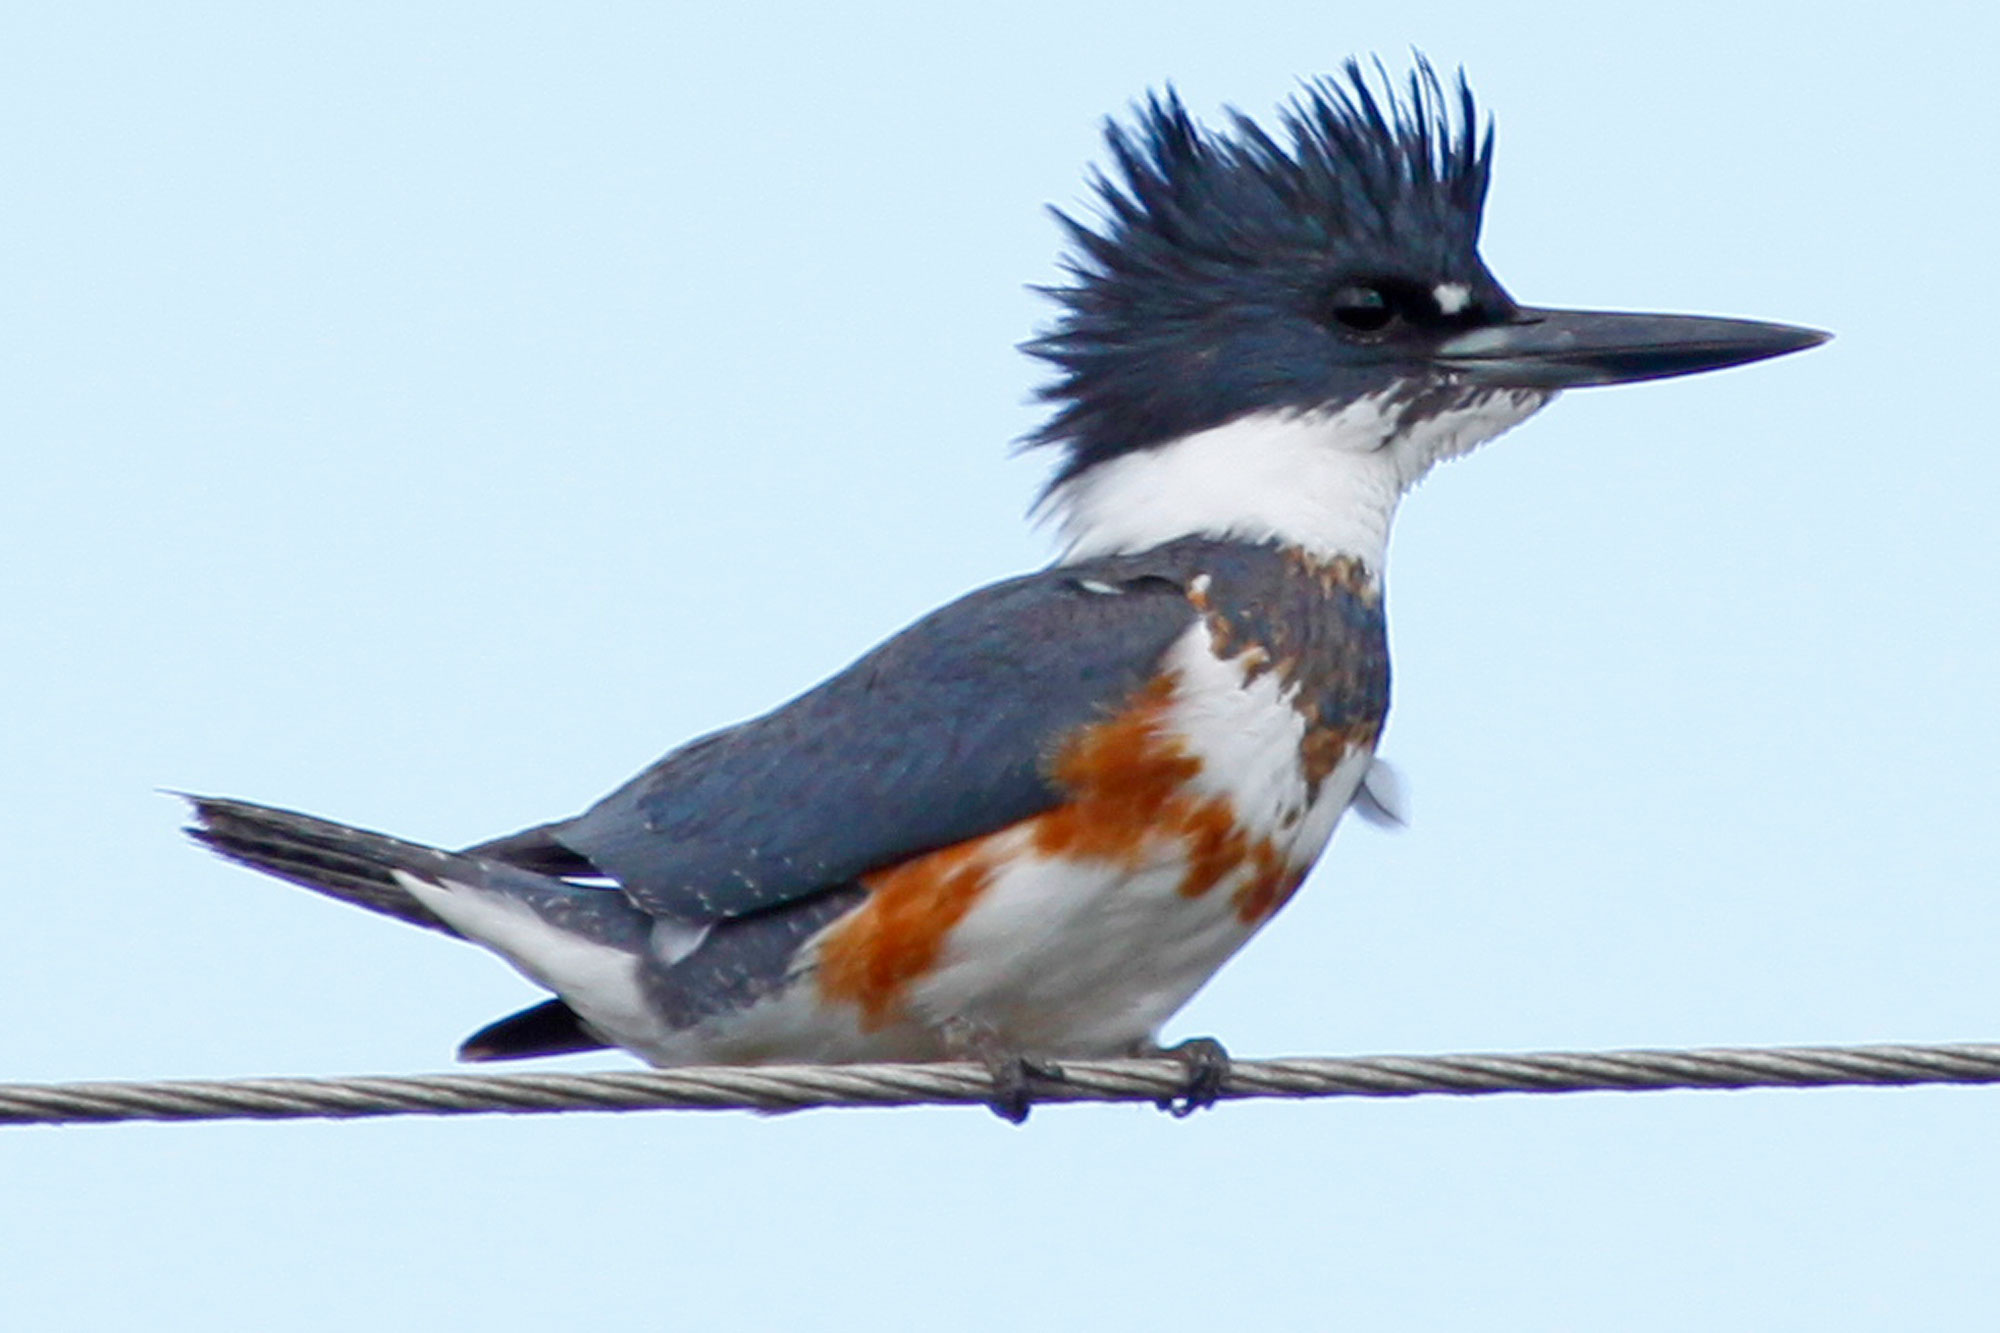 Photograph of a belted kingfisher perched on a metal wire. The kingfisher is blue, orange, and white with a relatively large head, a short tail, and a large black beak. Its head is mostly blue with a white chin and neck. The feather on the top of its head stick up wildly.